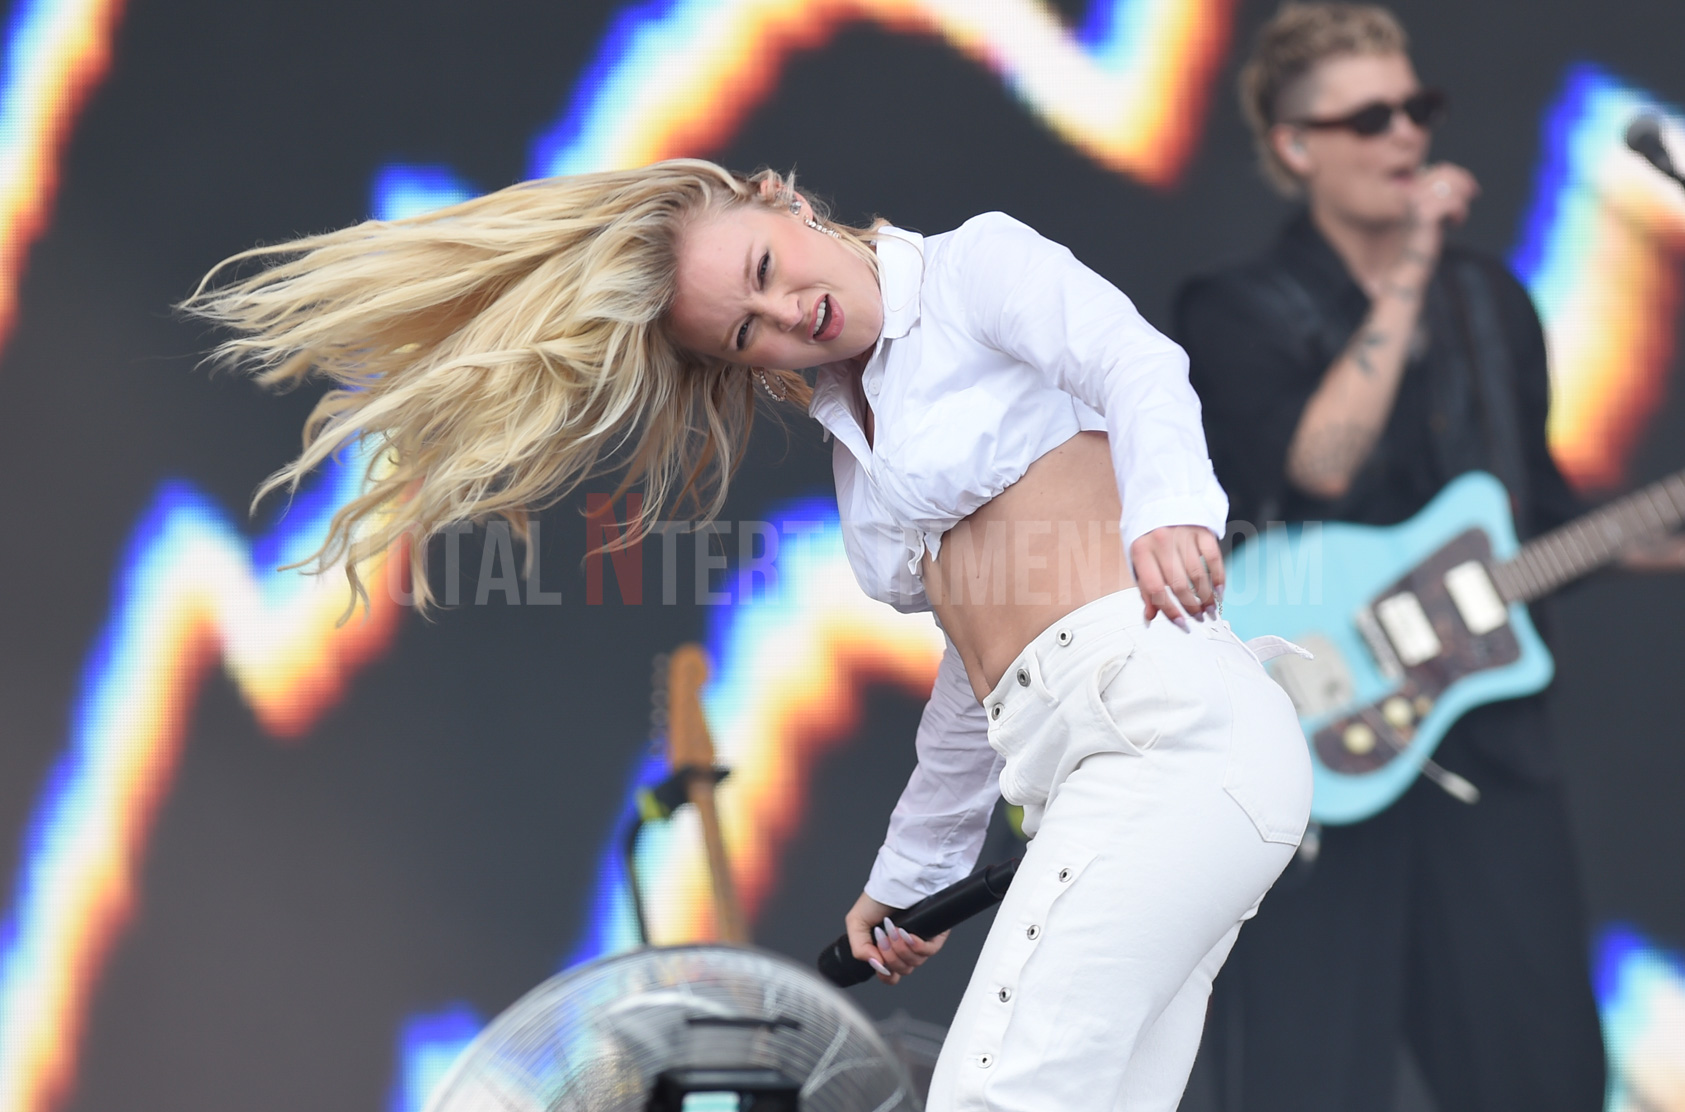 Live Event, Music, Stephen Farrell, Totalntertainment, Radio 1 Big weekend, Music Photography